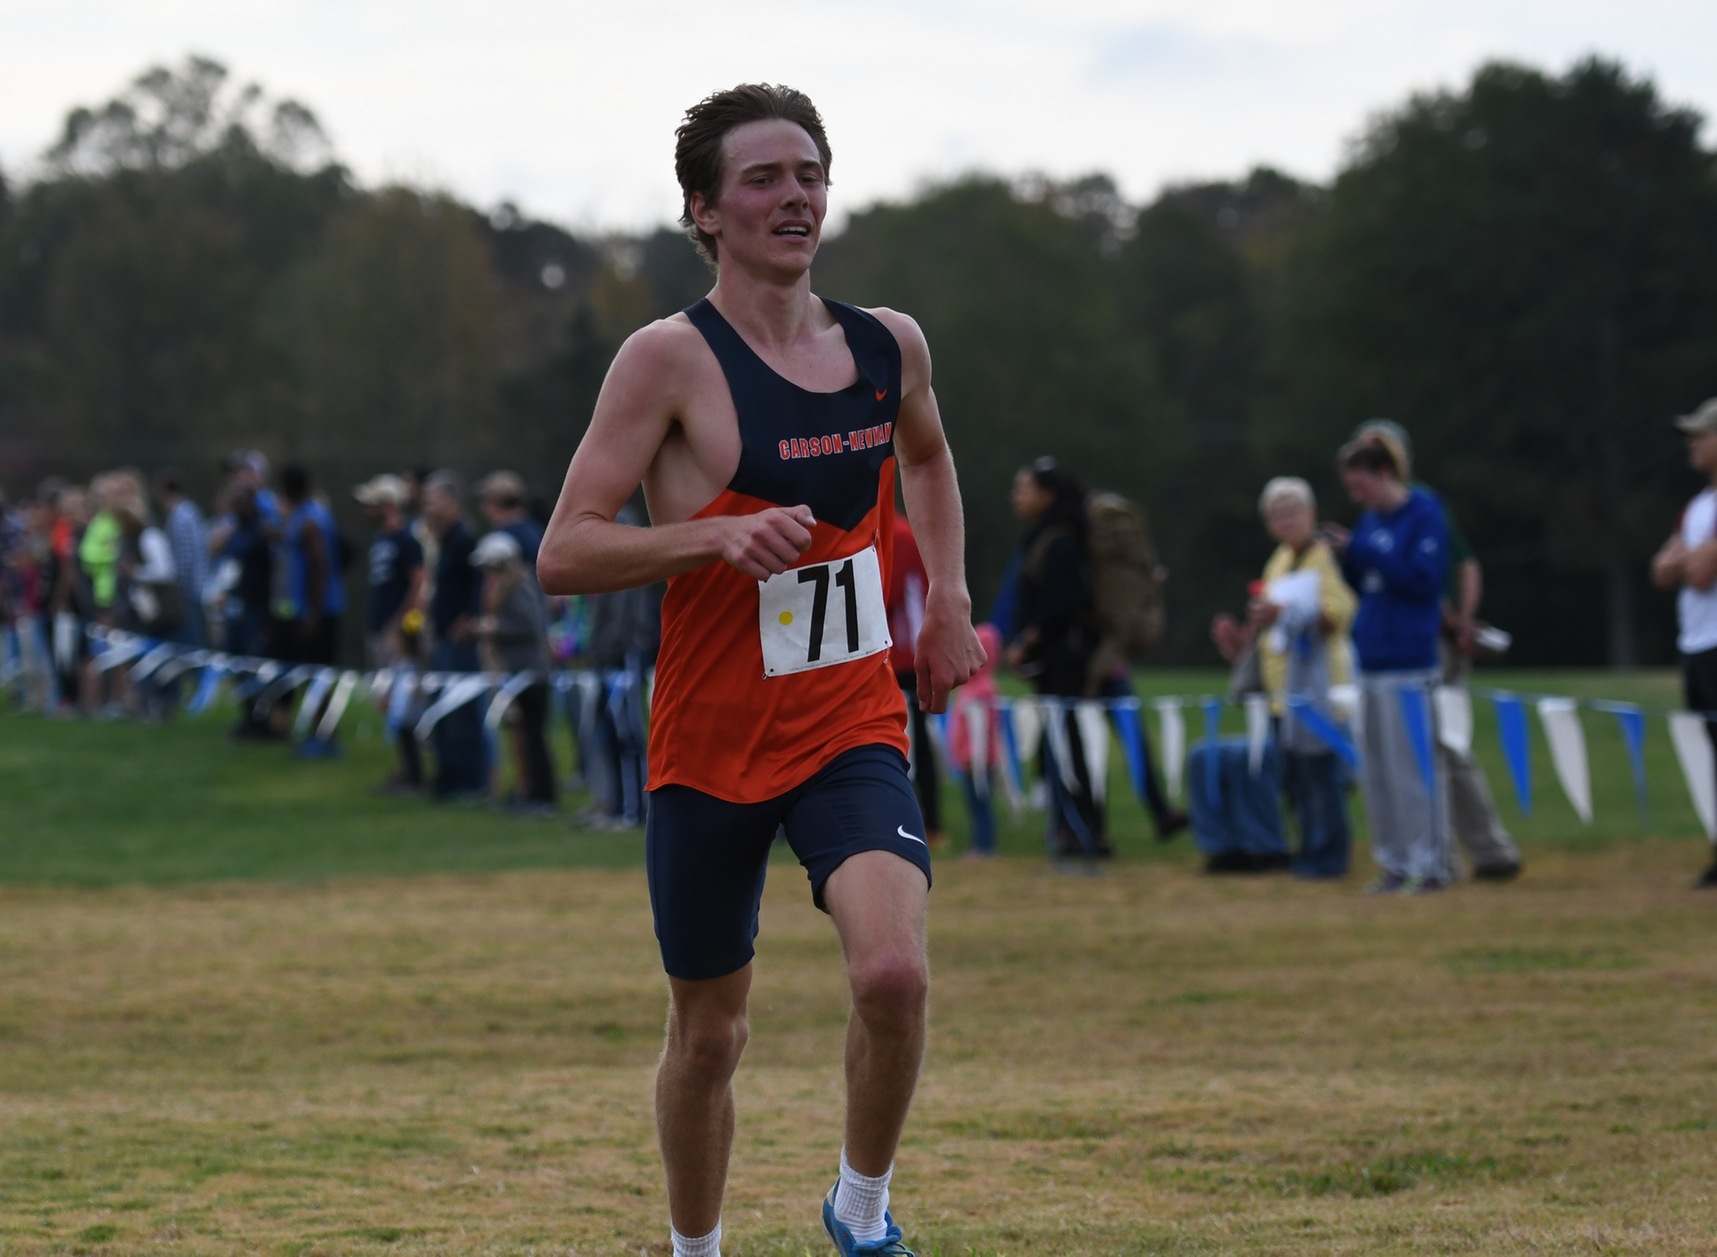 Gracious Greer Gliding into Cross Country Championships